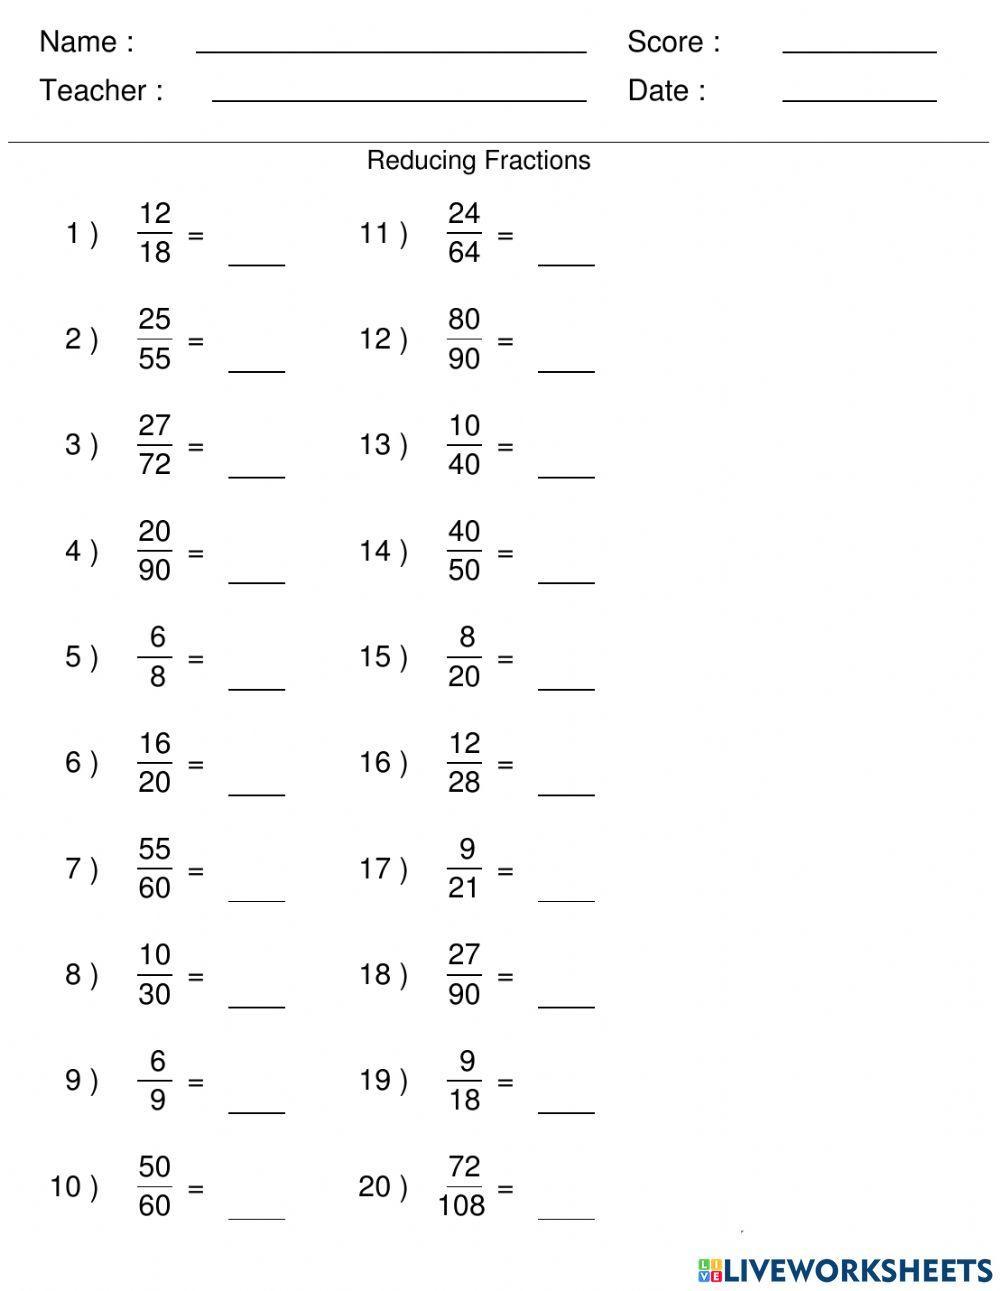 Simplifying Fractions